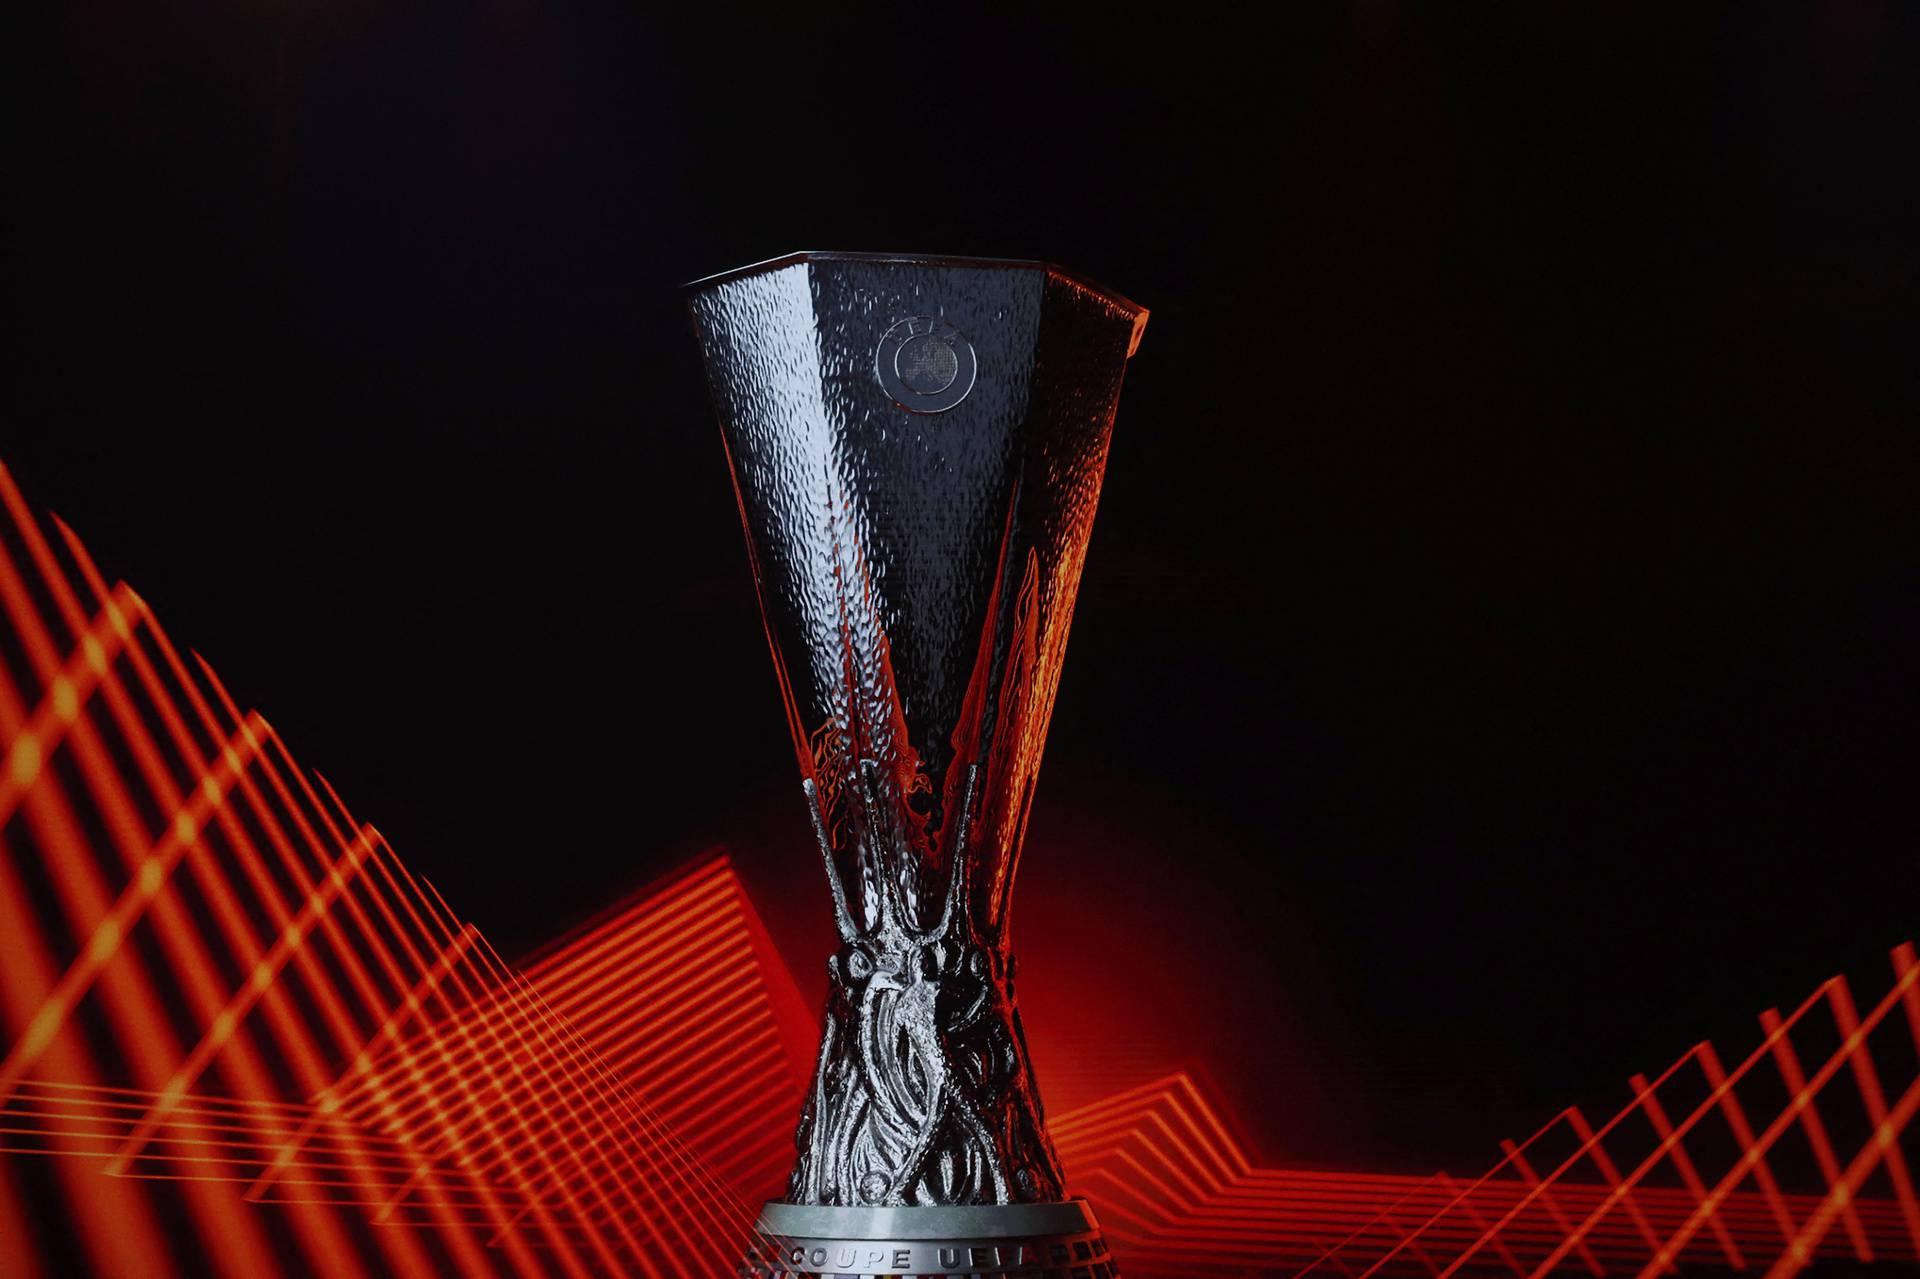 Europa League Group Stage draw